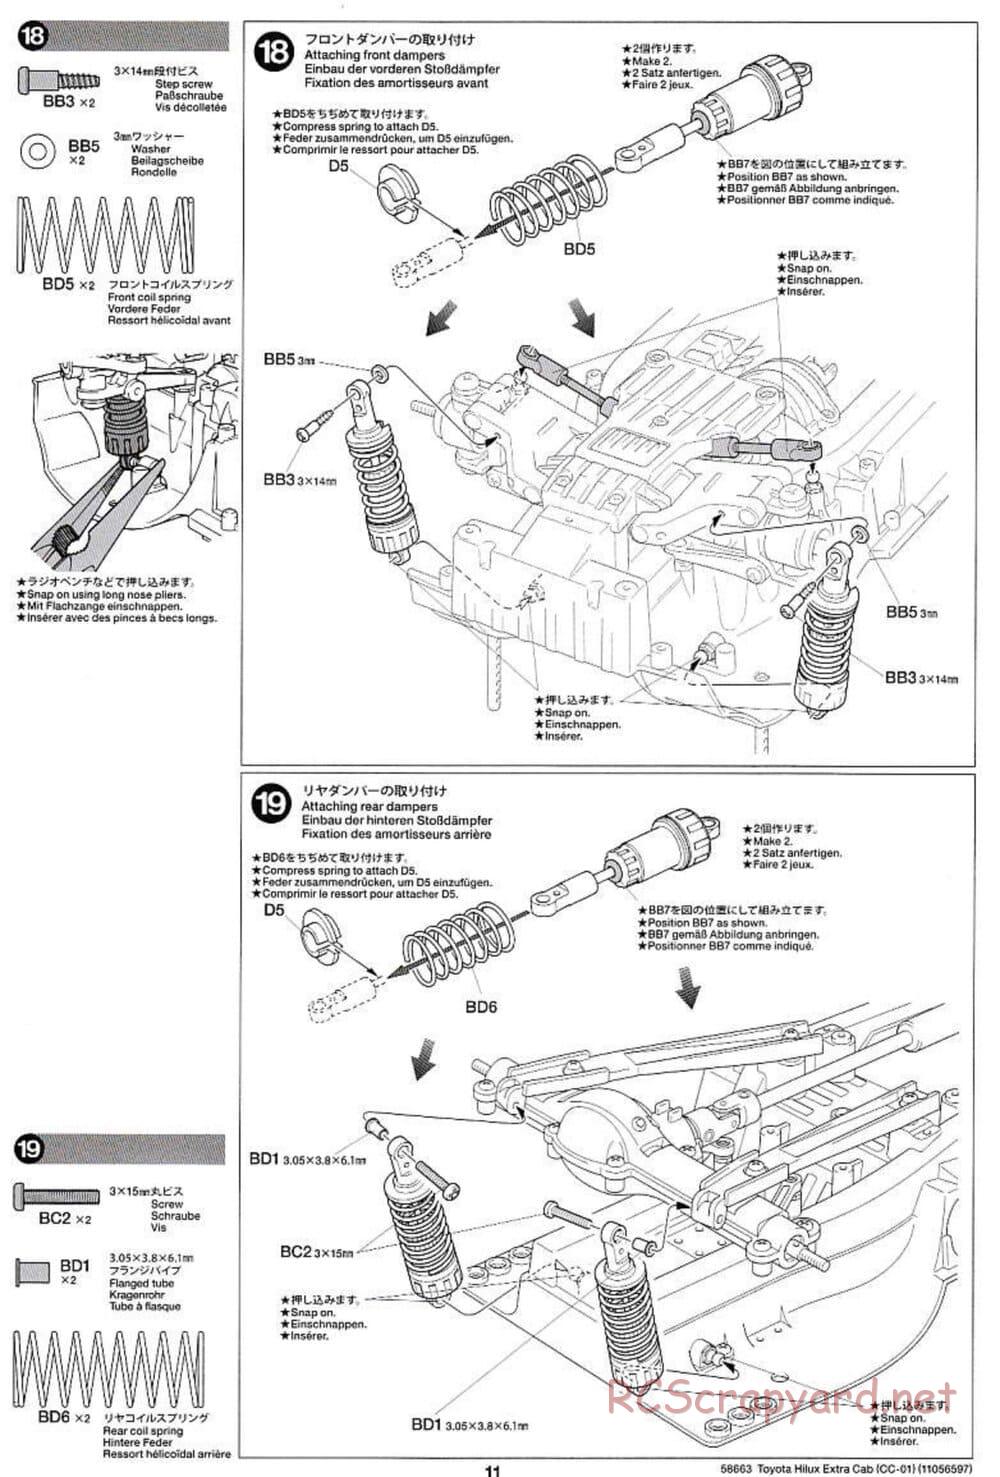 Tamiya - Toyota Hilux Extra Cab - CC-01 Chassis - Manual - Page 11